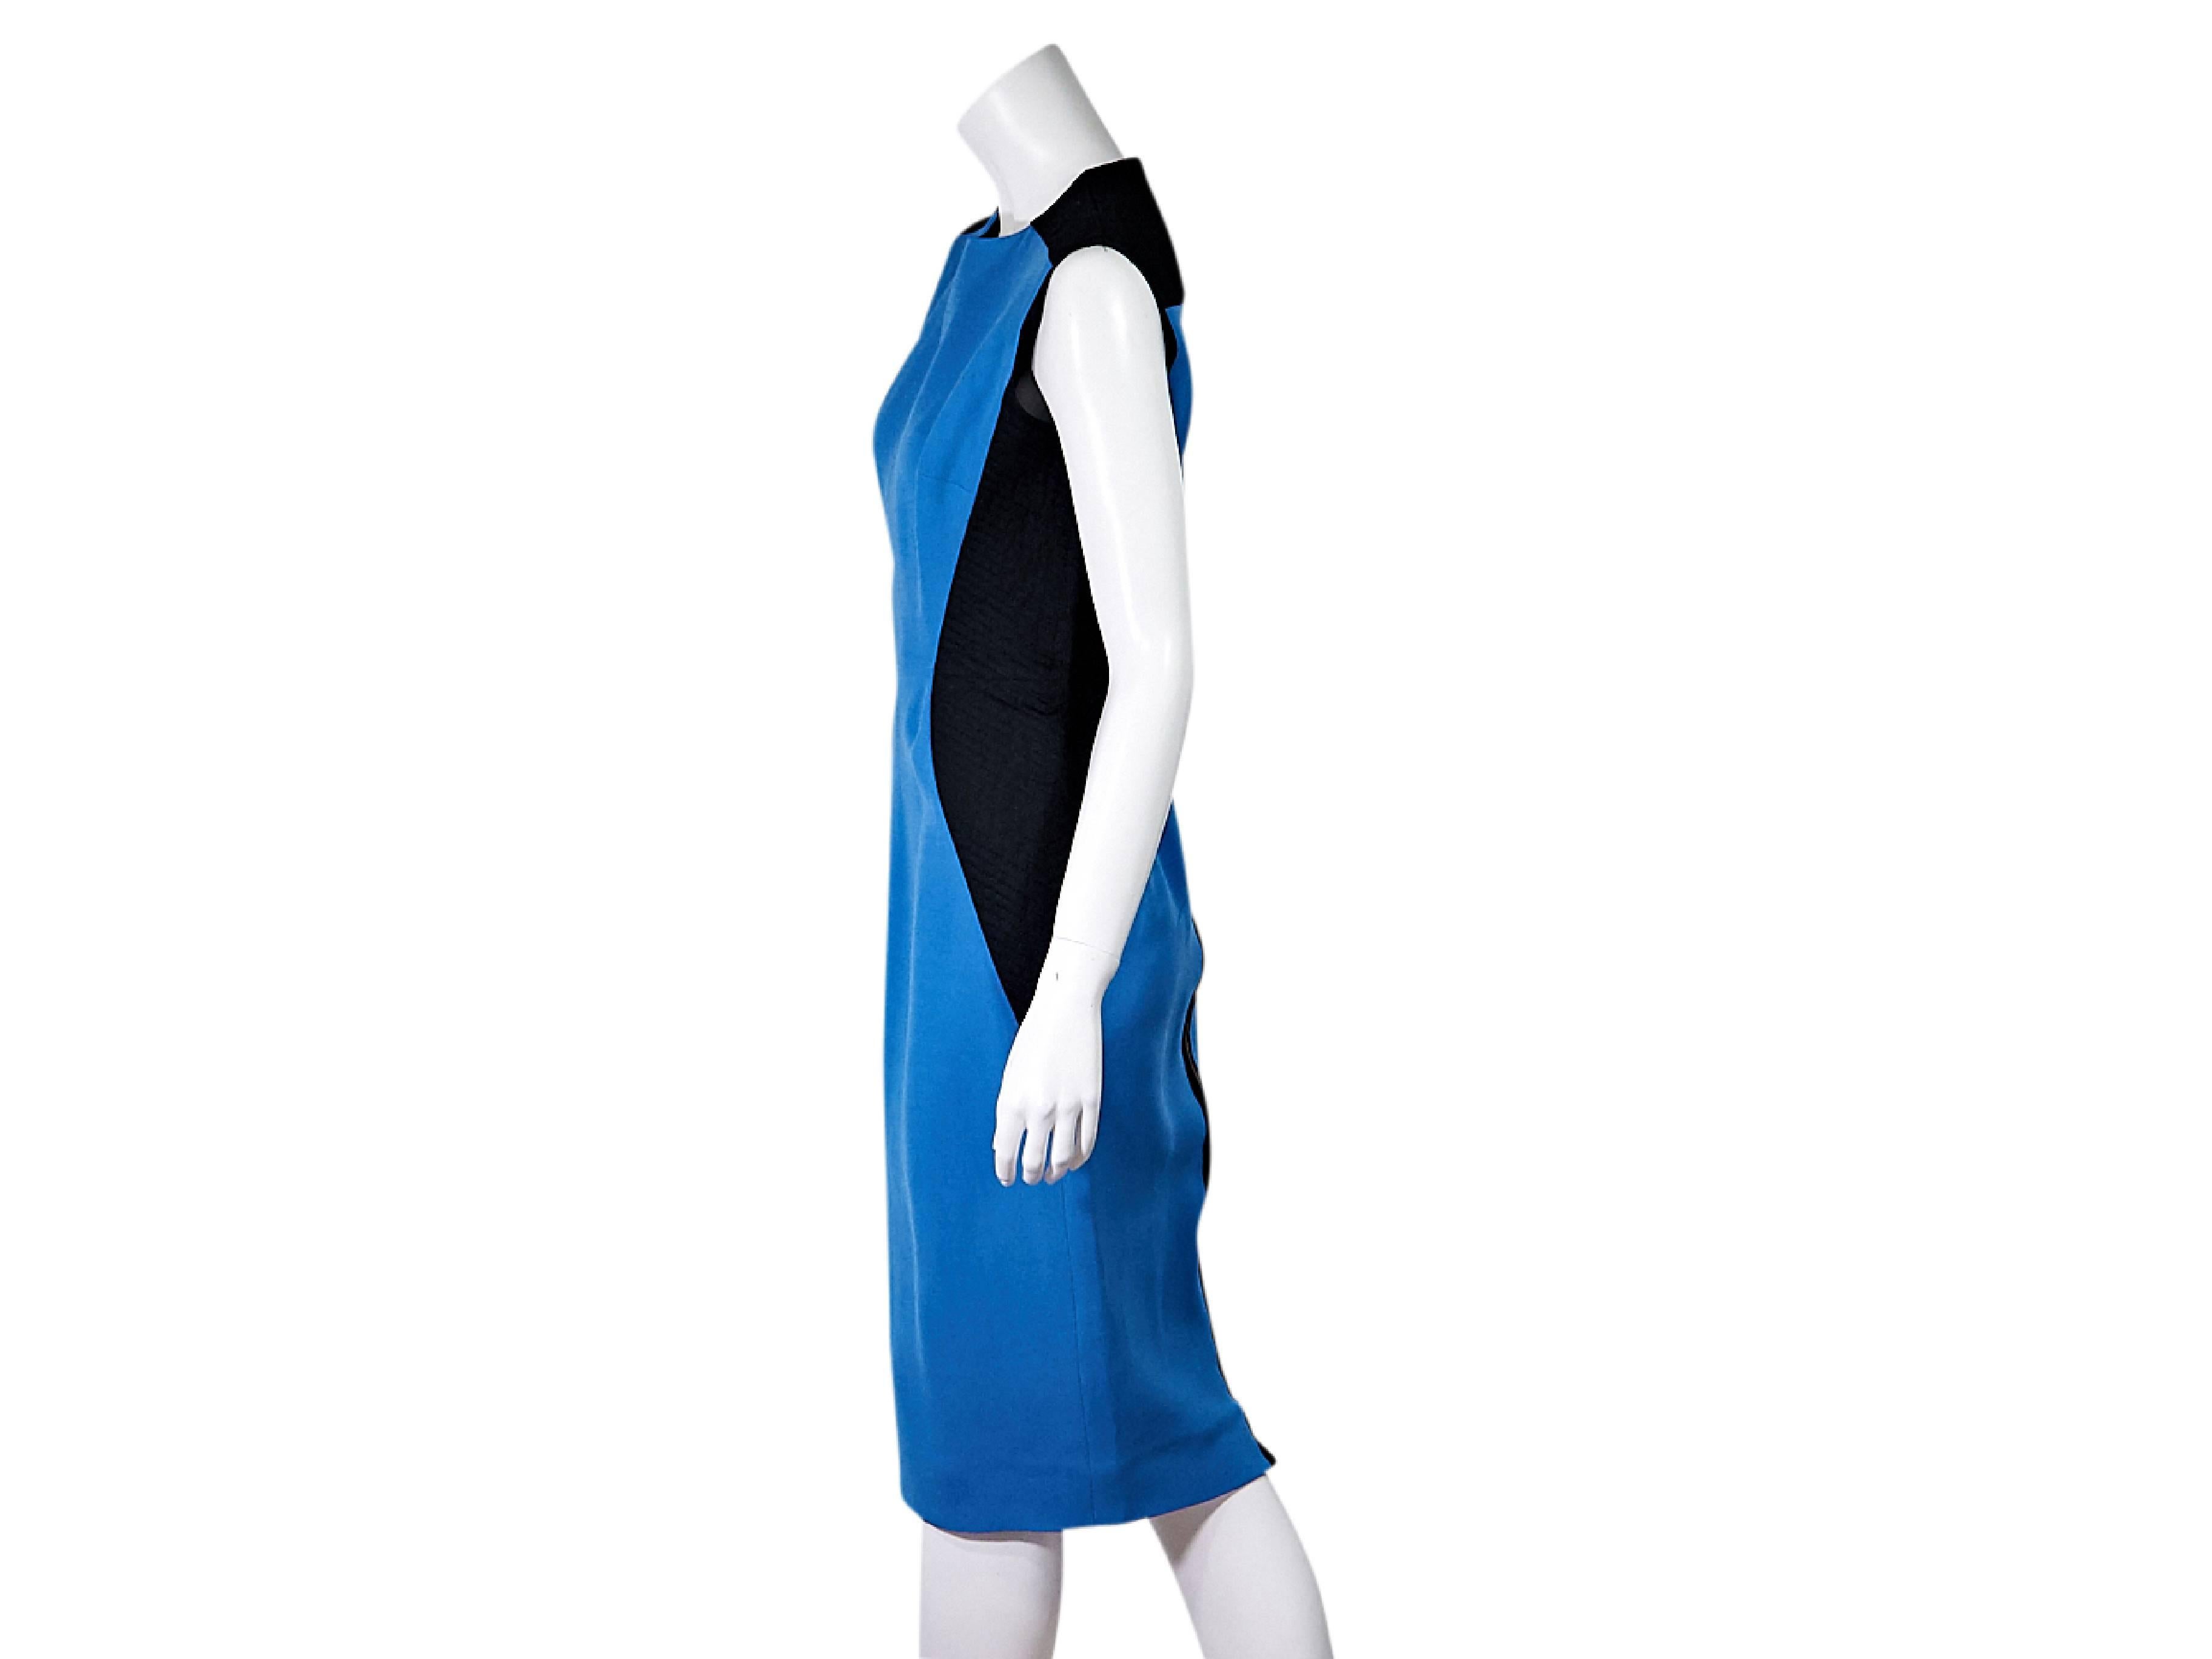 Product details:  Blue and black sheath dress by Victoria Beckham.  Flattering colorblock design.  Crewneck.  Sleeveless.  Back zip closure.  Size 10
Condition: Pre-owned. Very good.

Est. Retail $ 1,700.00
